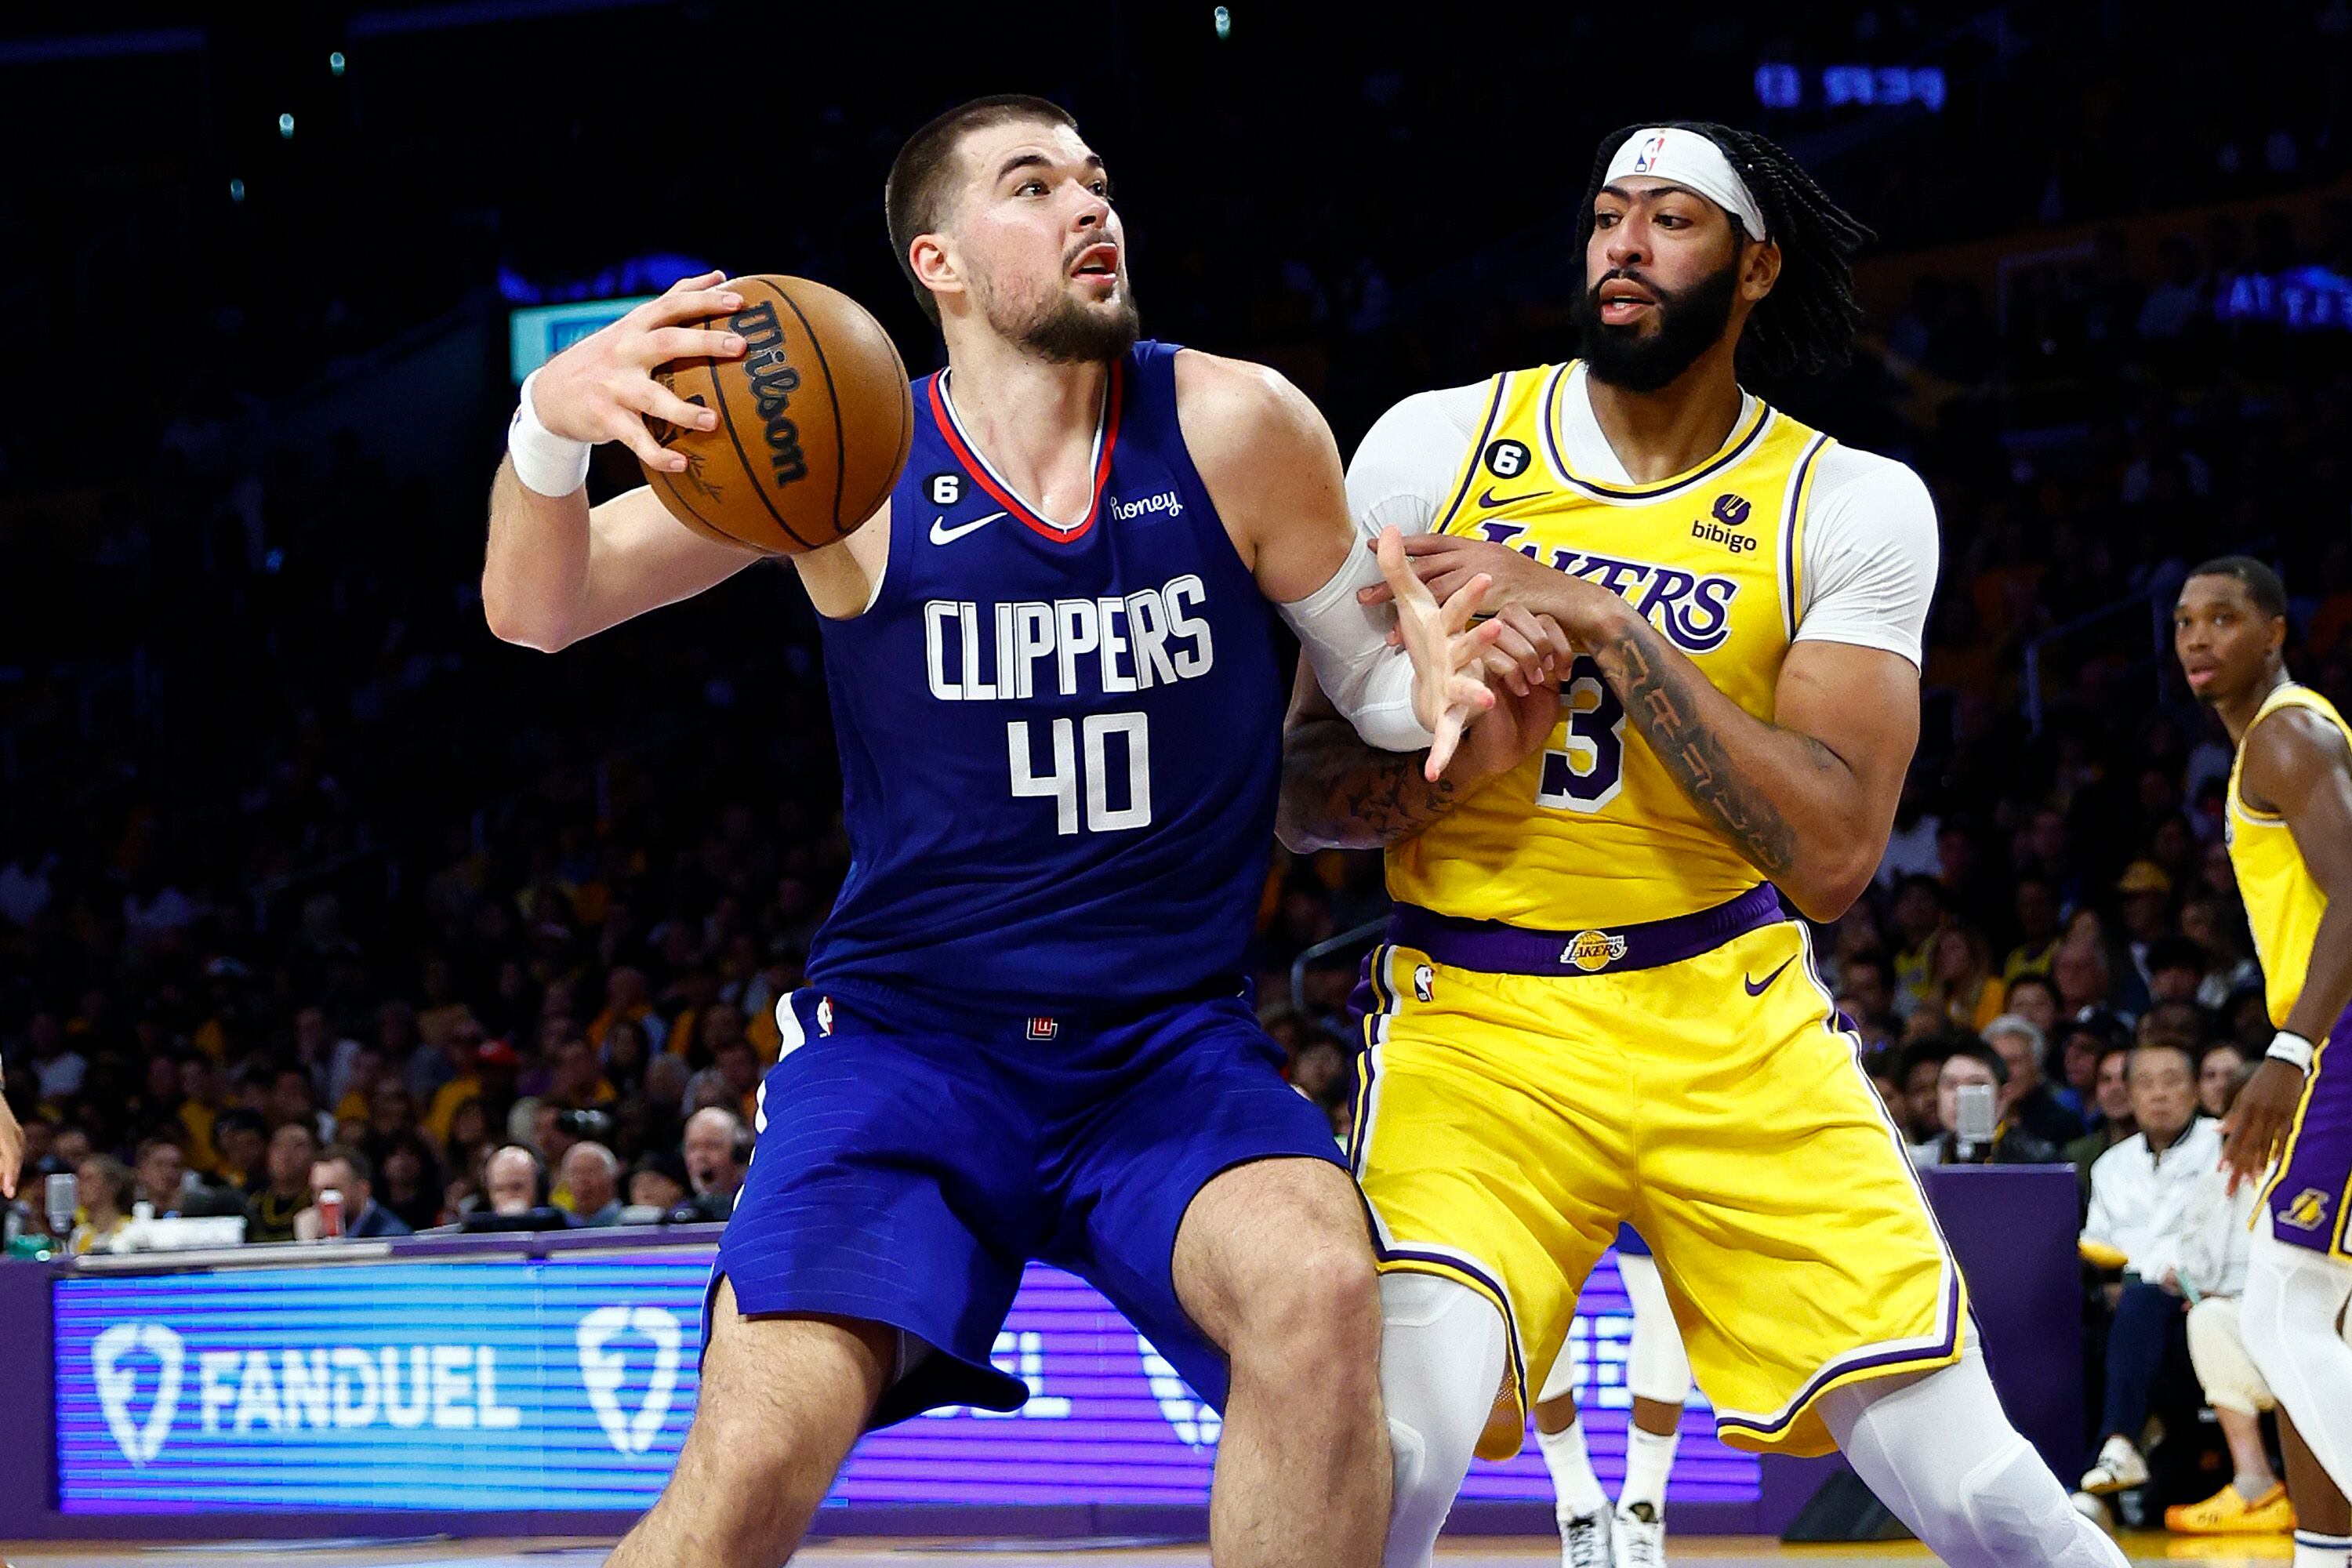 Lakers vs. 76ers Odds & Prediction: Betting Value on Underdog